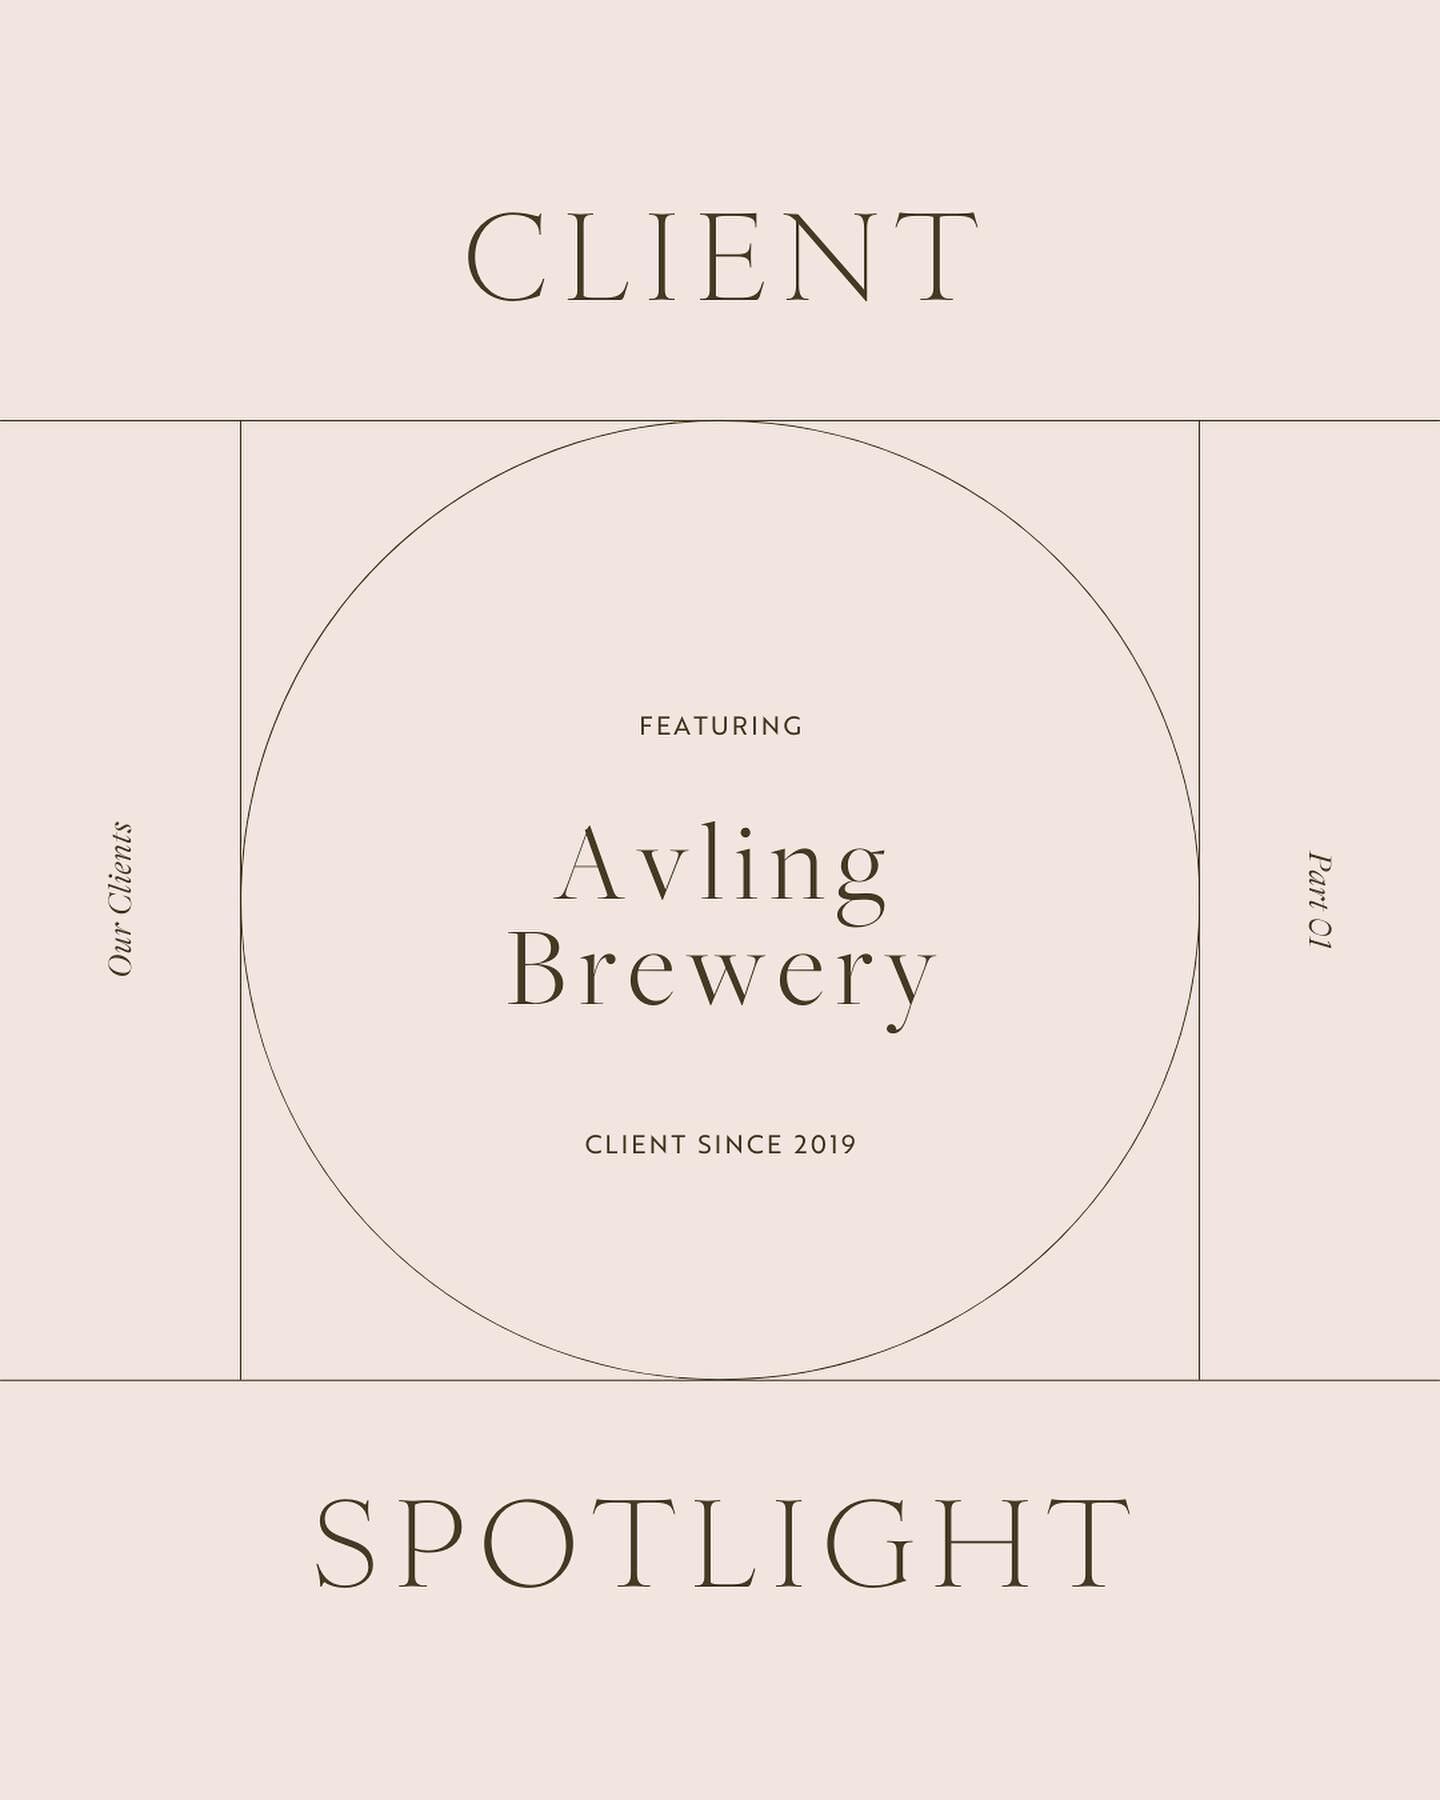 Our good friends @avlingto were one of our very first clients, and we have a lot of love for them as a local business. They pride themselves on using sustainable farming practices and using seasonal ingredients grown on their farms (including one on 